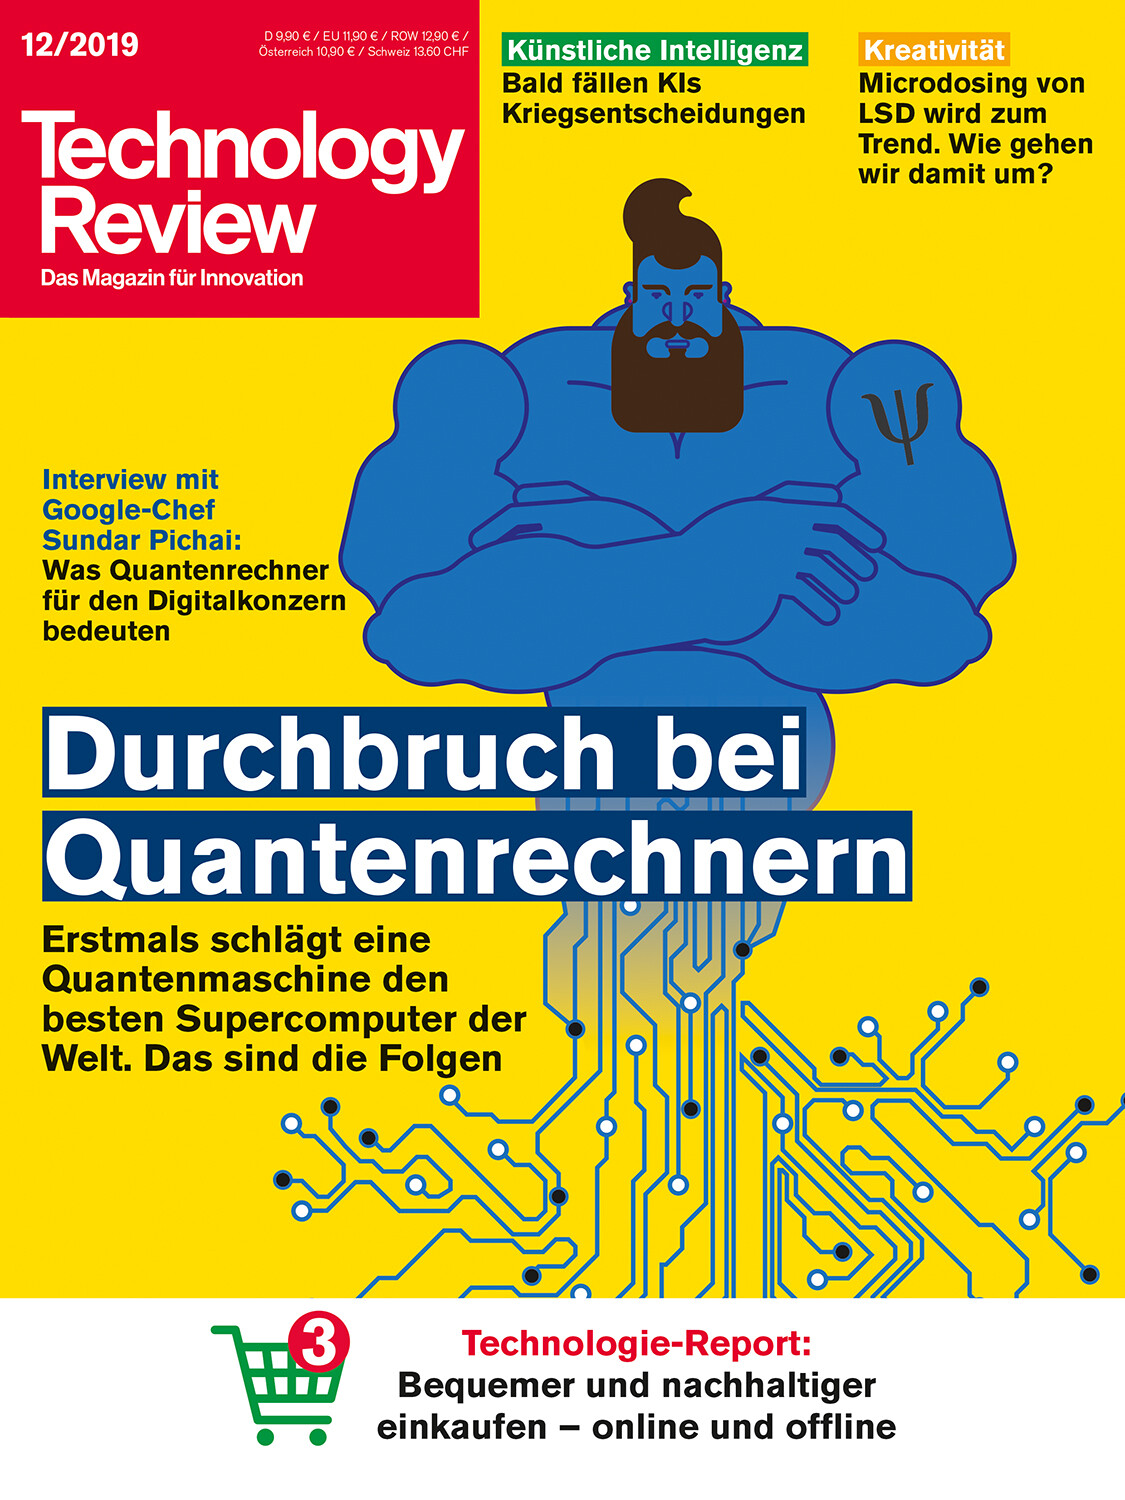 Technology Review 12/2019